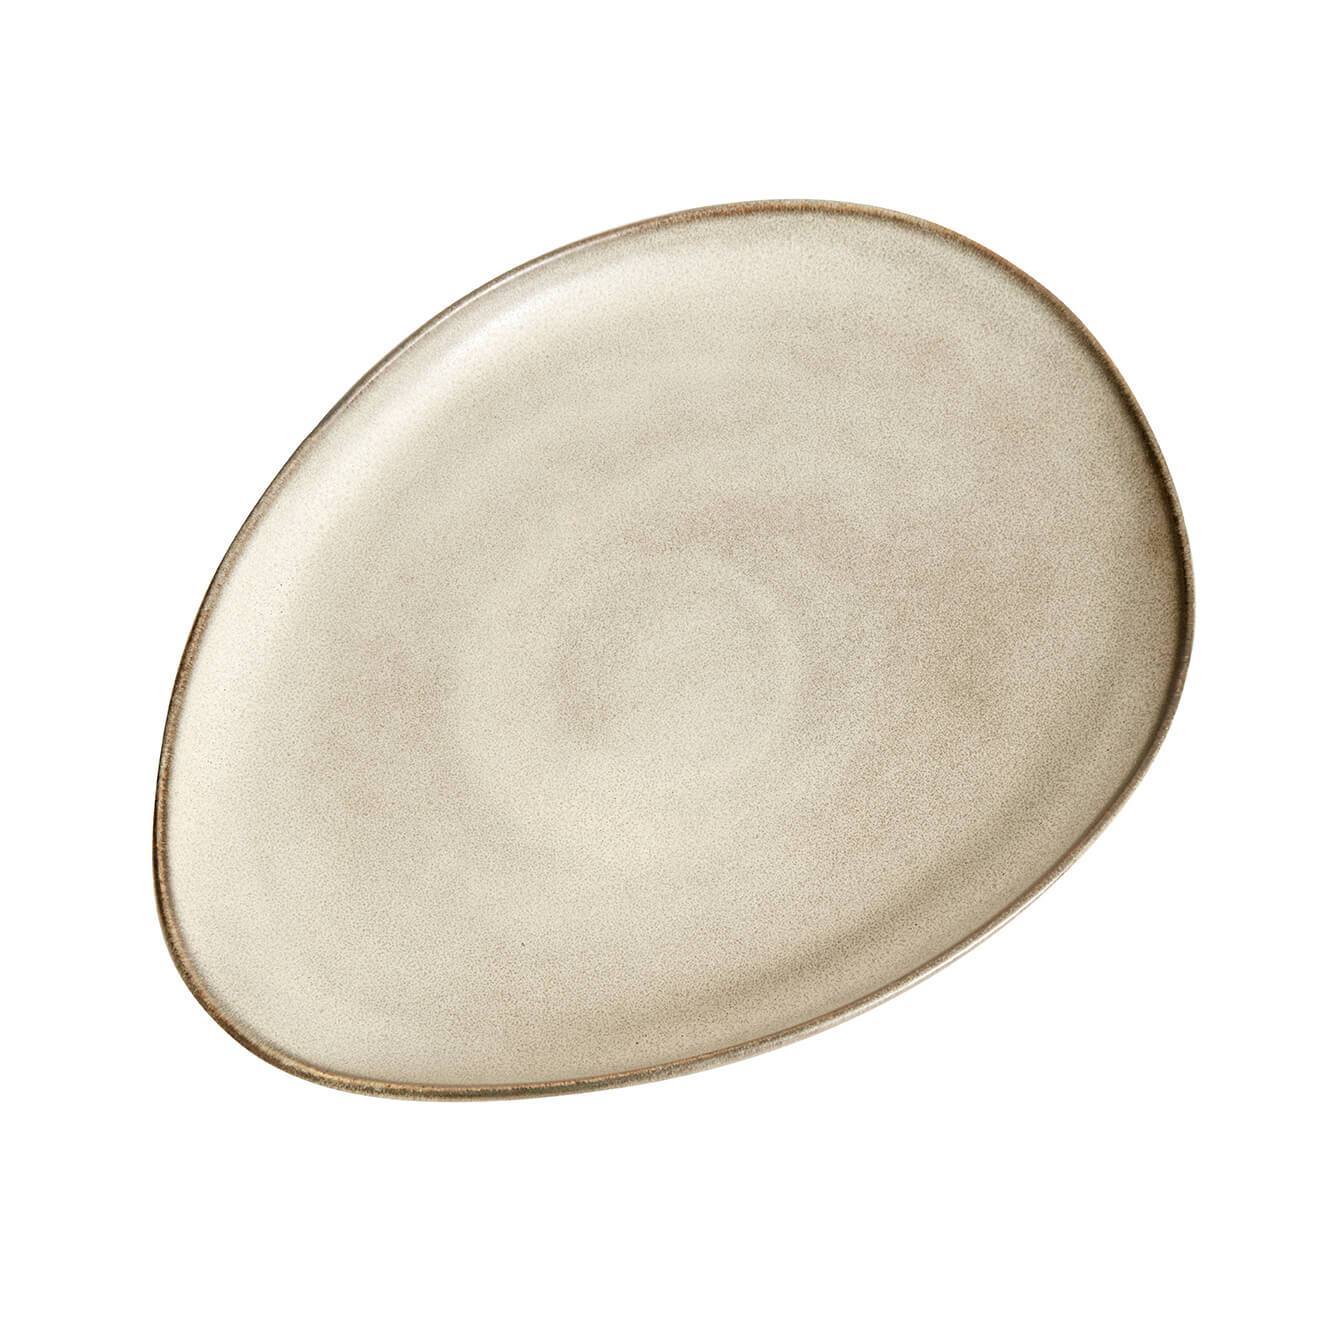 Muubs Mame Dinner Plate Oysters, 24 cm